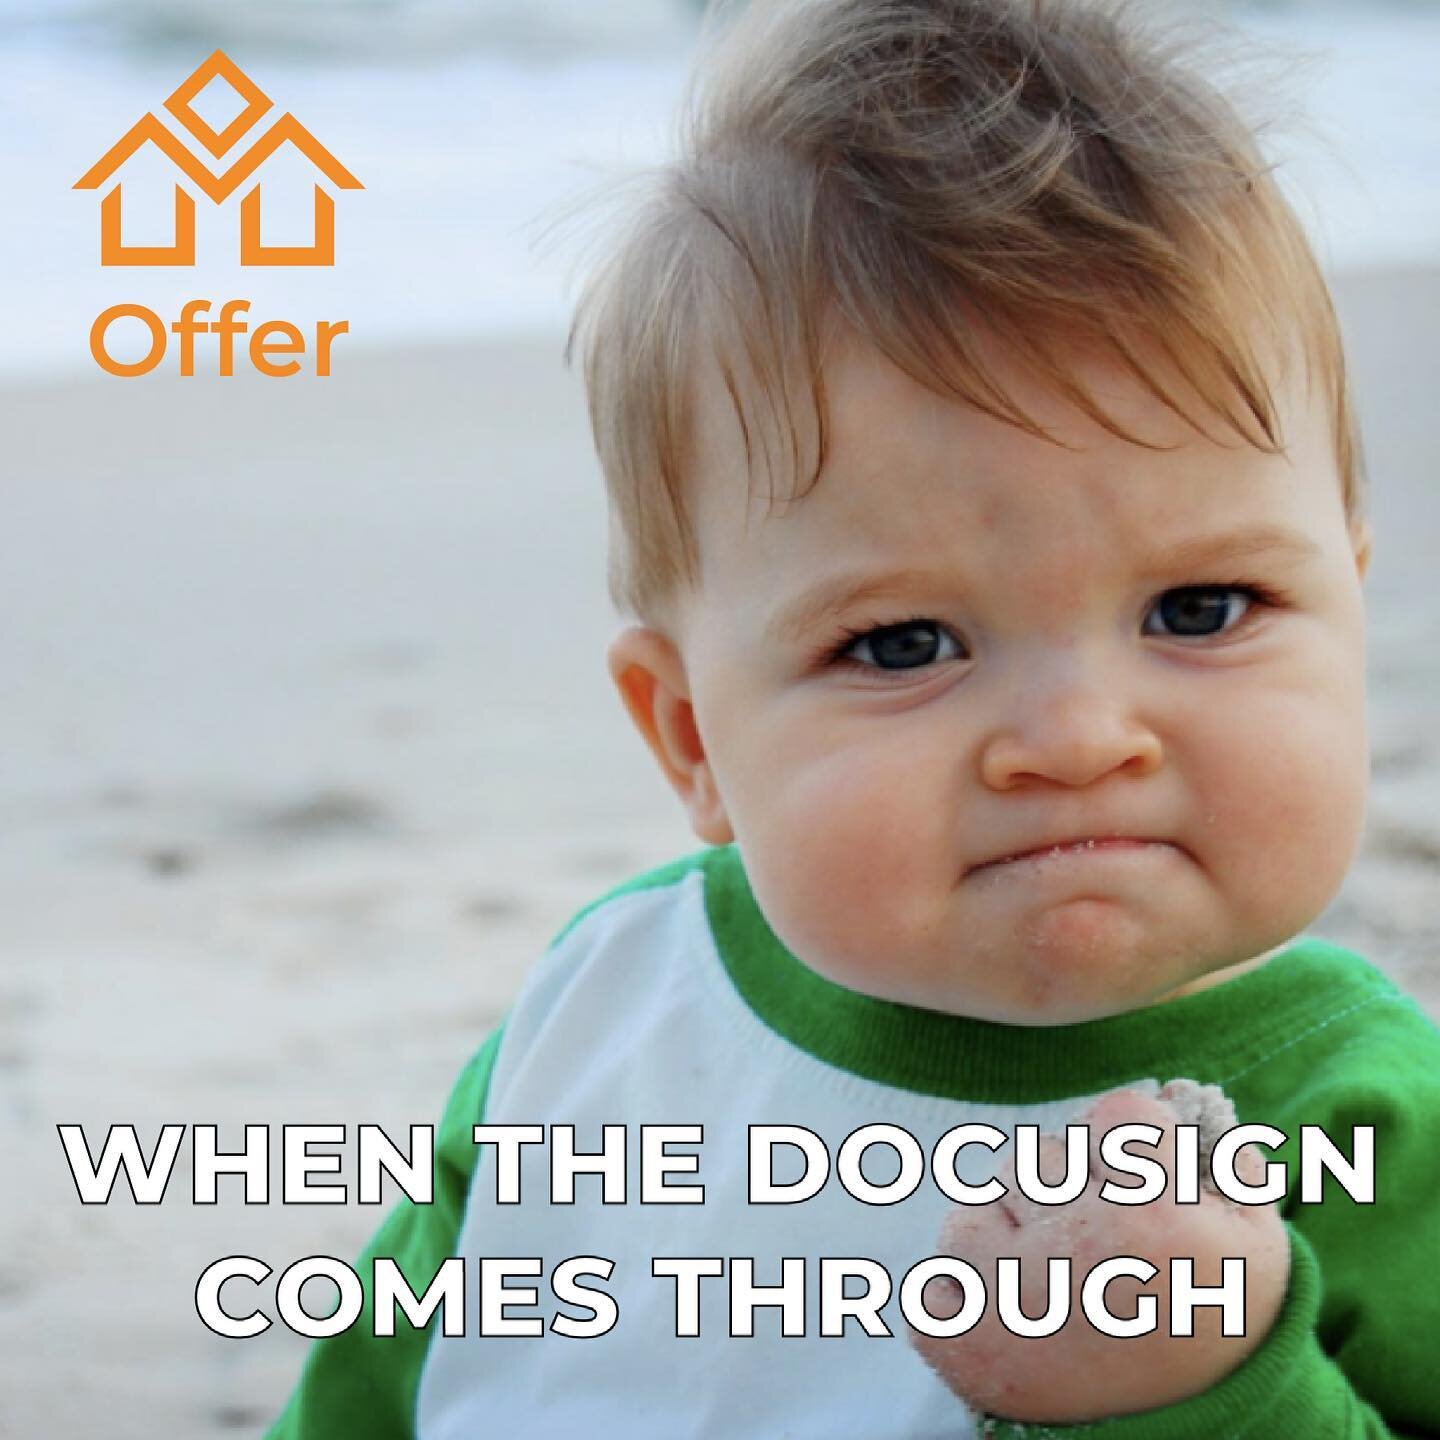 That feeling when the deal is officially closed 😎 

Call us today to get started on your home selling process! 🏠💵

#realestateinvesting #realestate #webuyhouses #dallas #dallastexas #sellyourhome #realtor #texas #home #realestateinvestor  #dfw #ca